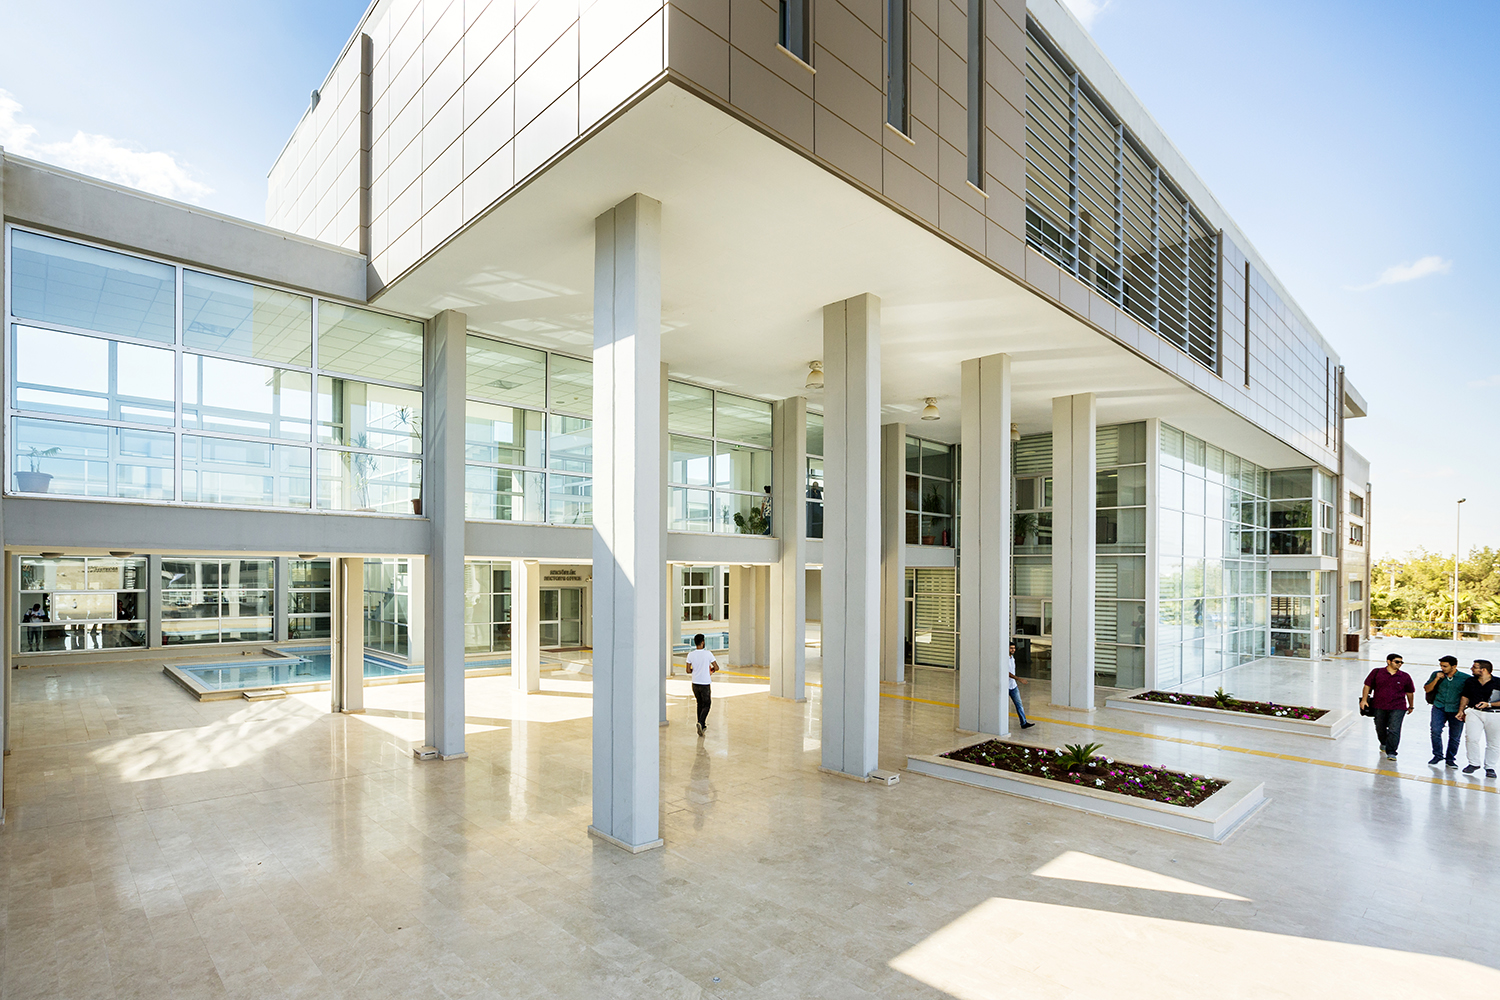 Administrative Core Project of the Eastern Mediterranean University